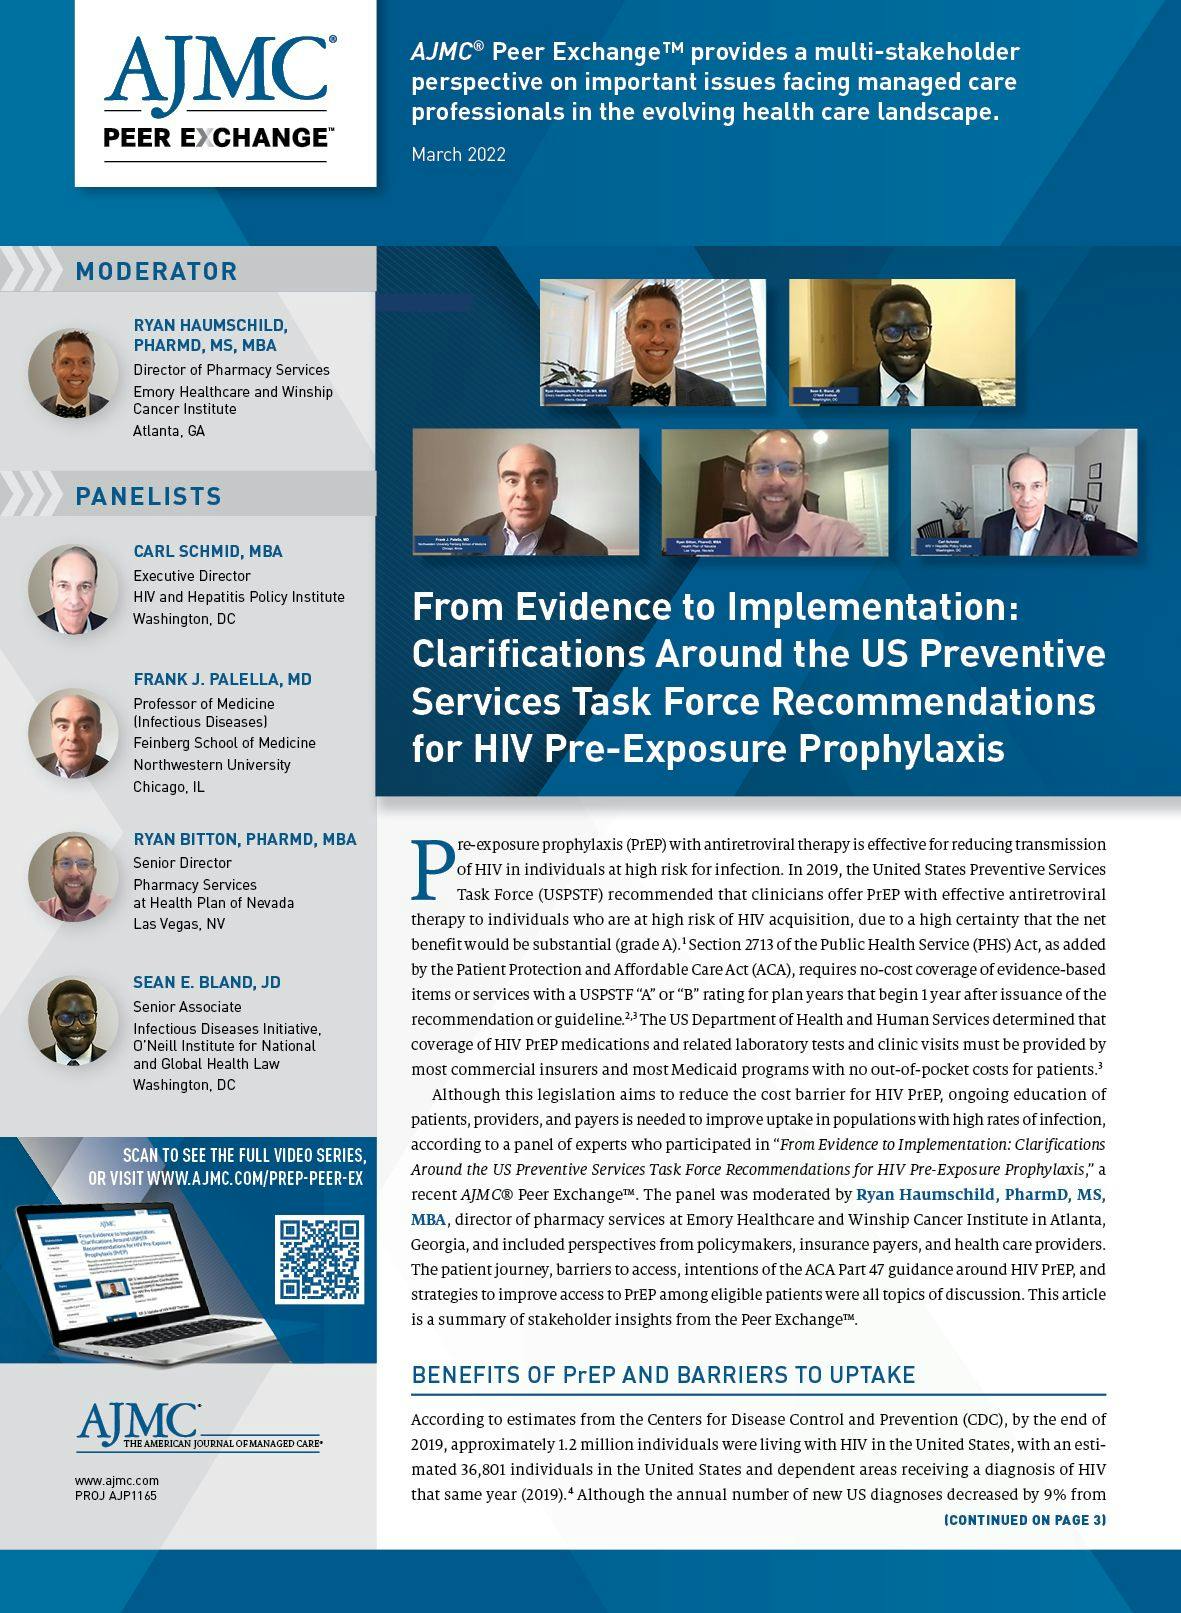 From Evidence to Implementation: Clarifications Around the US Preventive Services Task Force Recommendations for HIV Pre-Exposure Prophylaxis